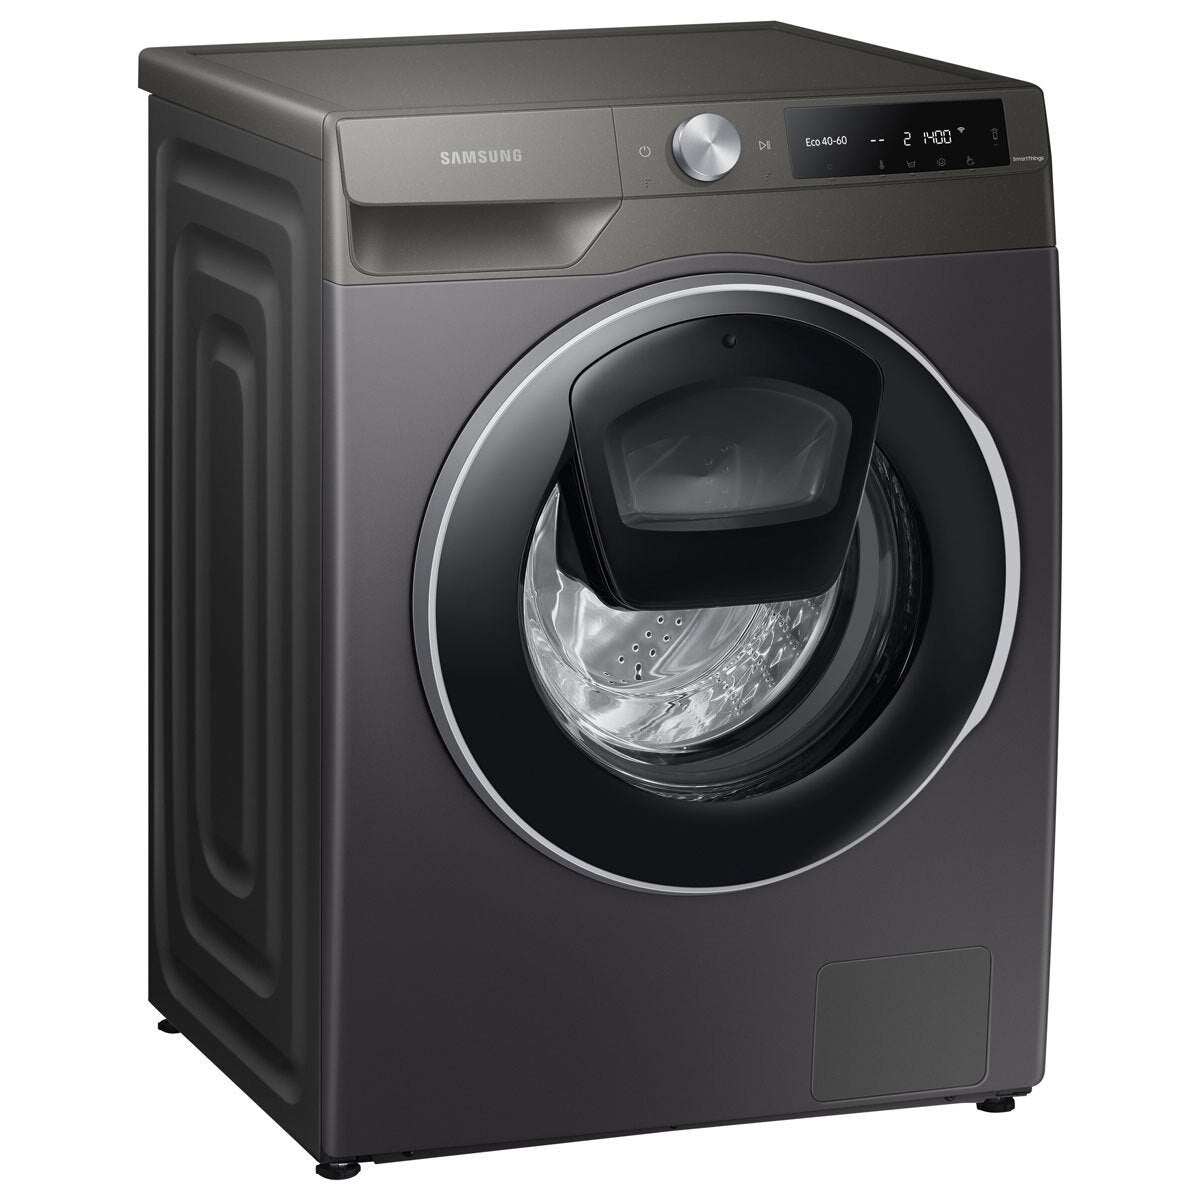 Samsung WW90T684DLN/S1, 9kg, 1400rpm, Washing Machine, A+++ Rating in Graphite - Signature Retail Stores